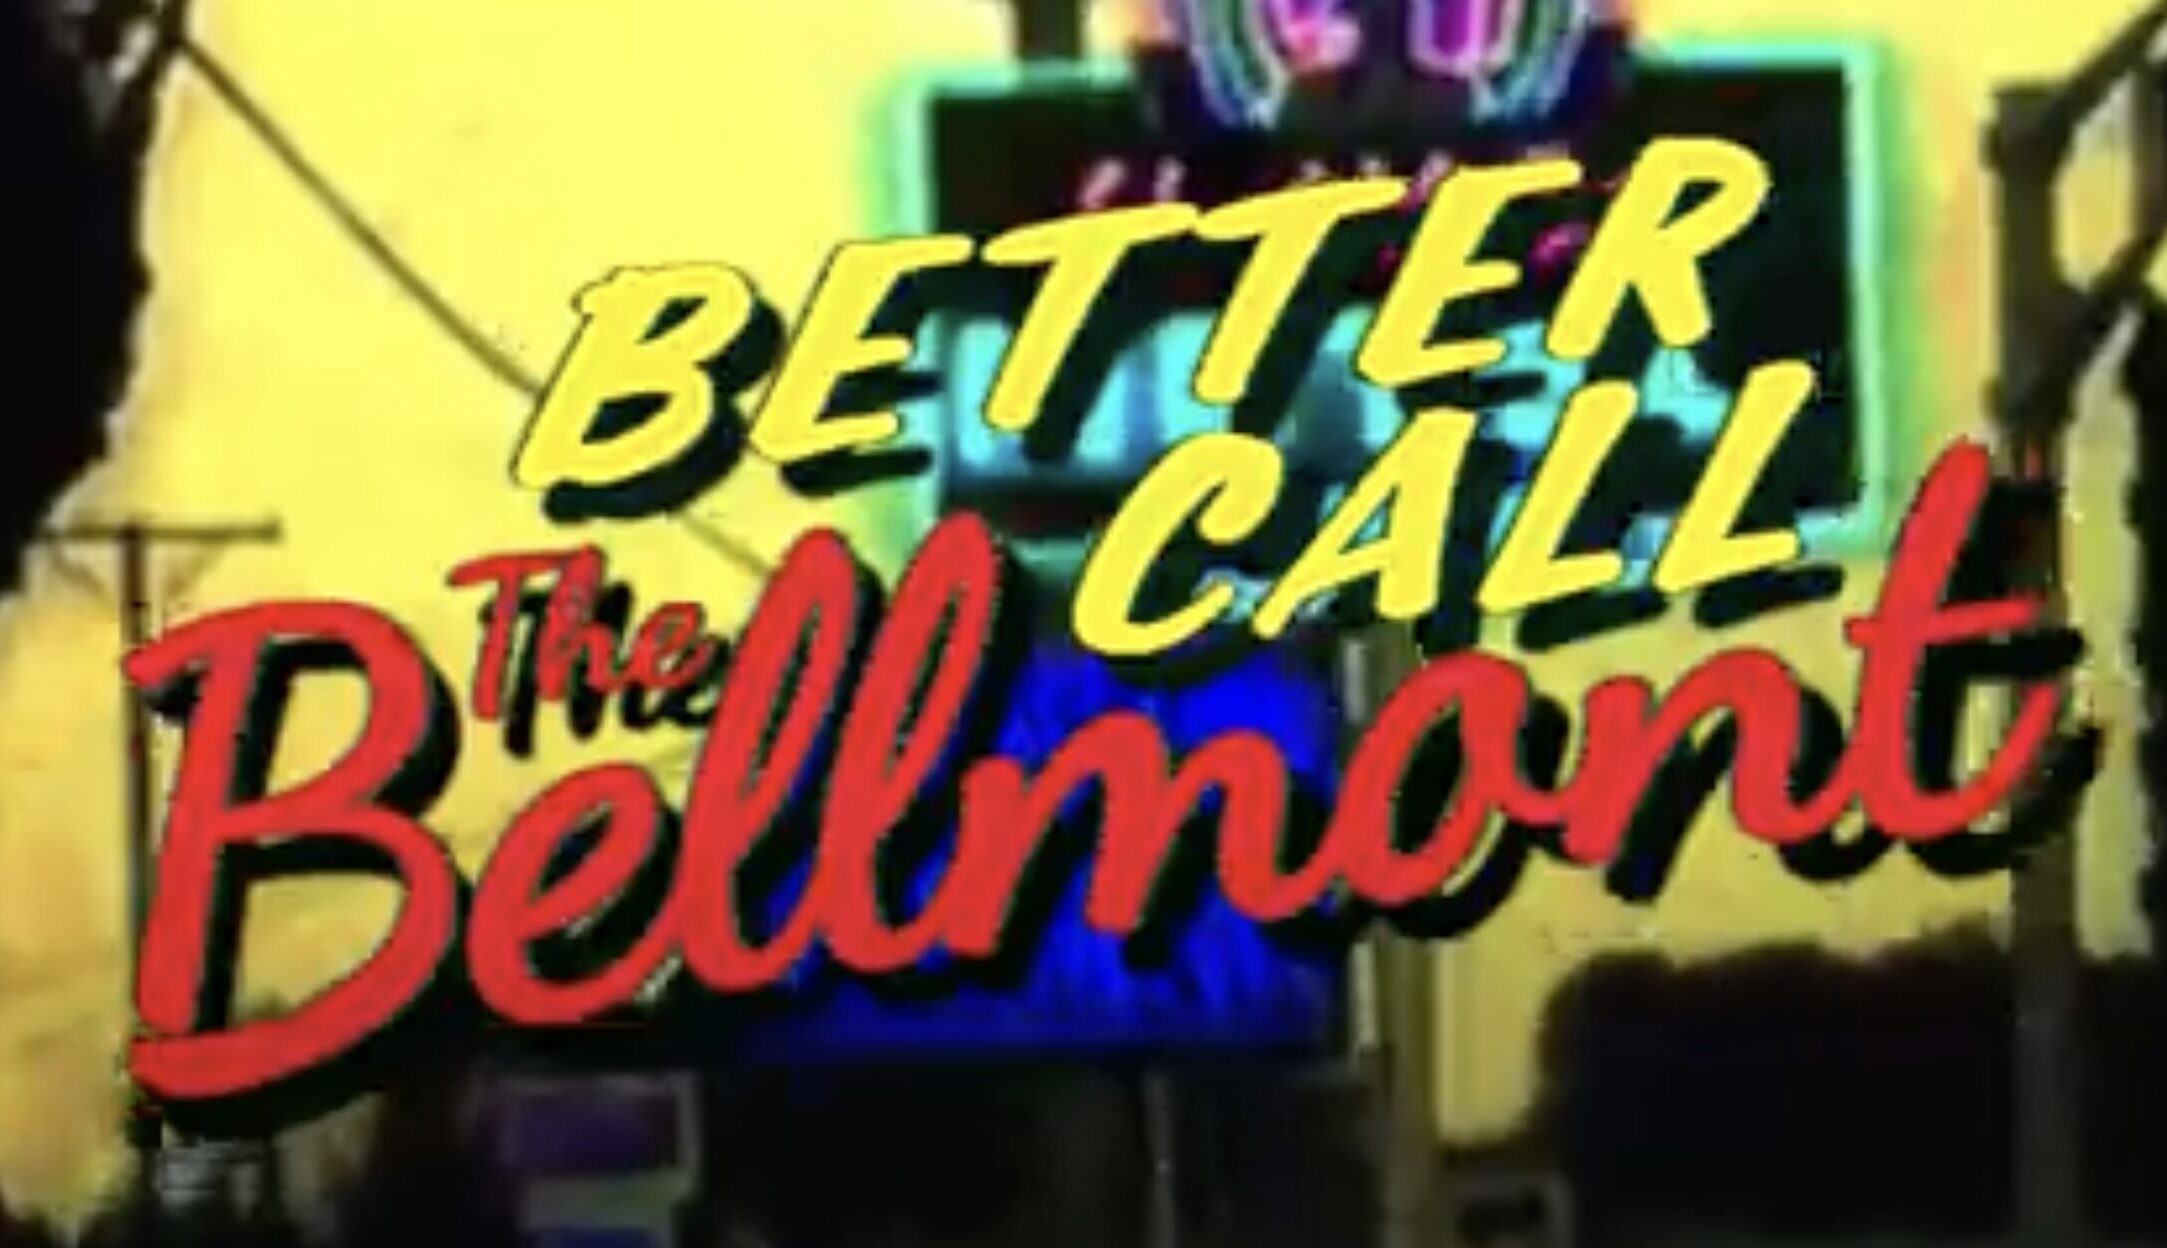 The Bellmont “Hide Your Tracks”